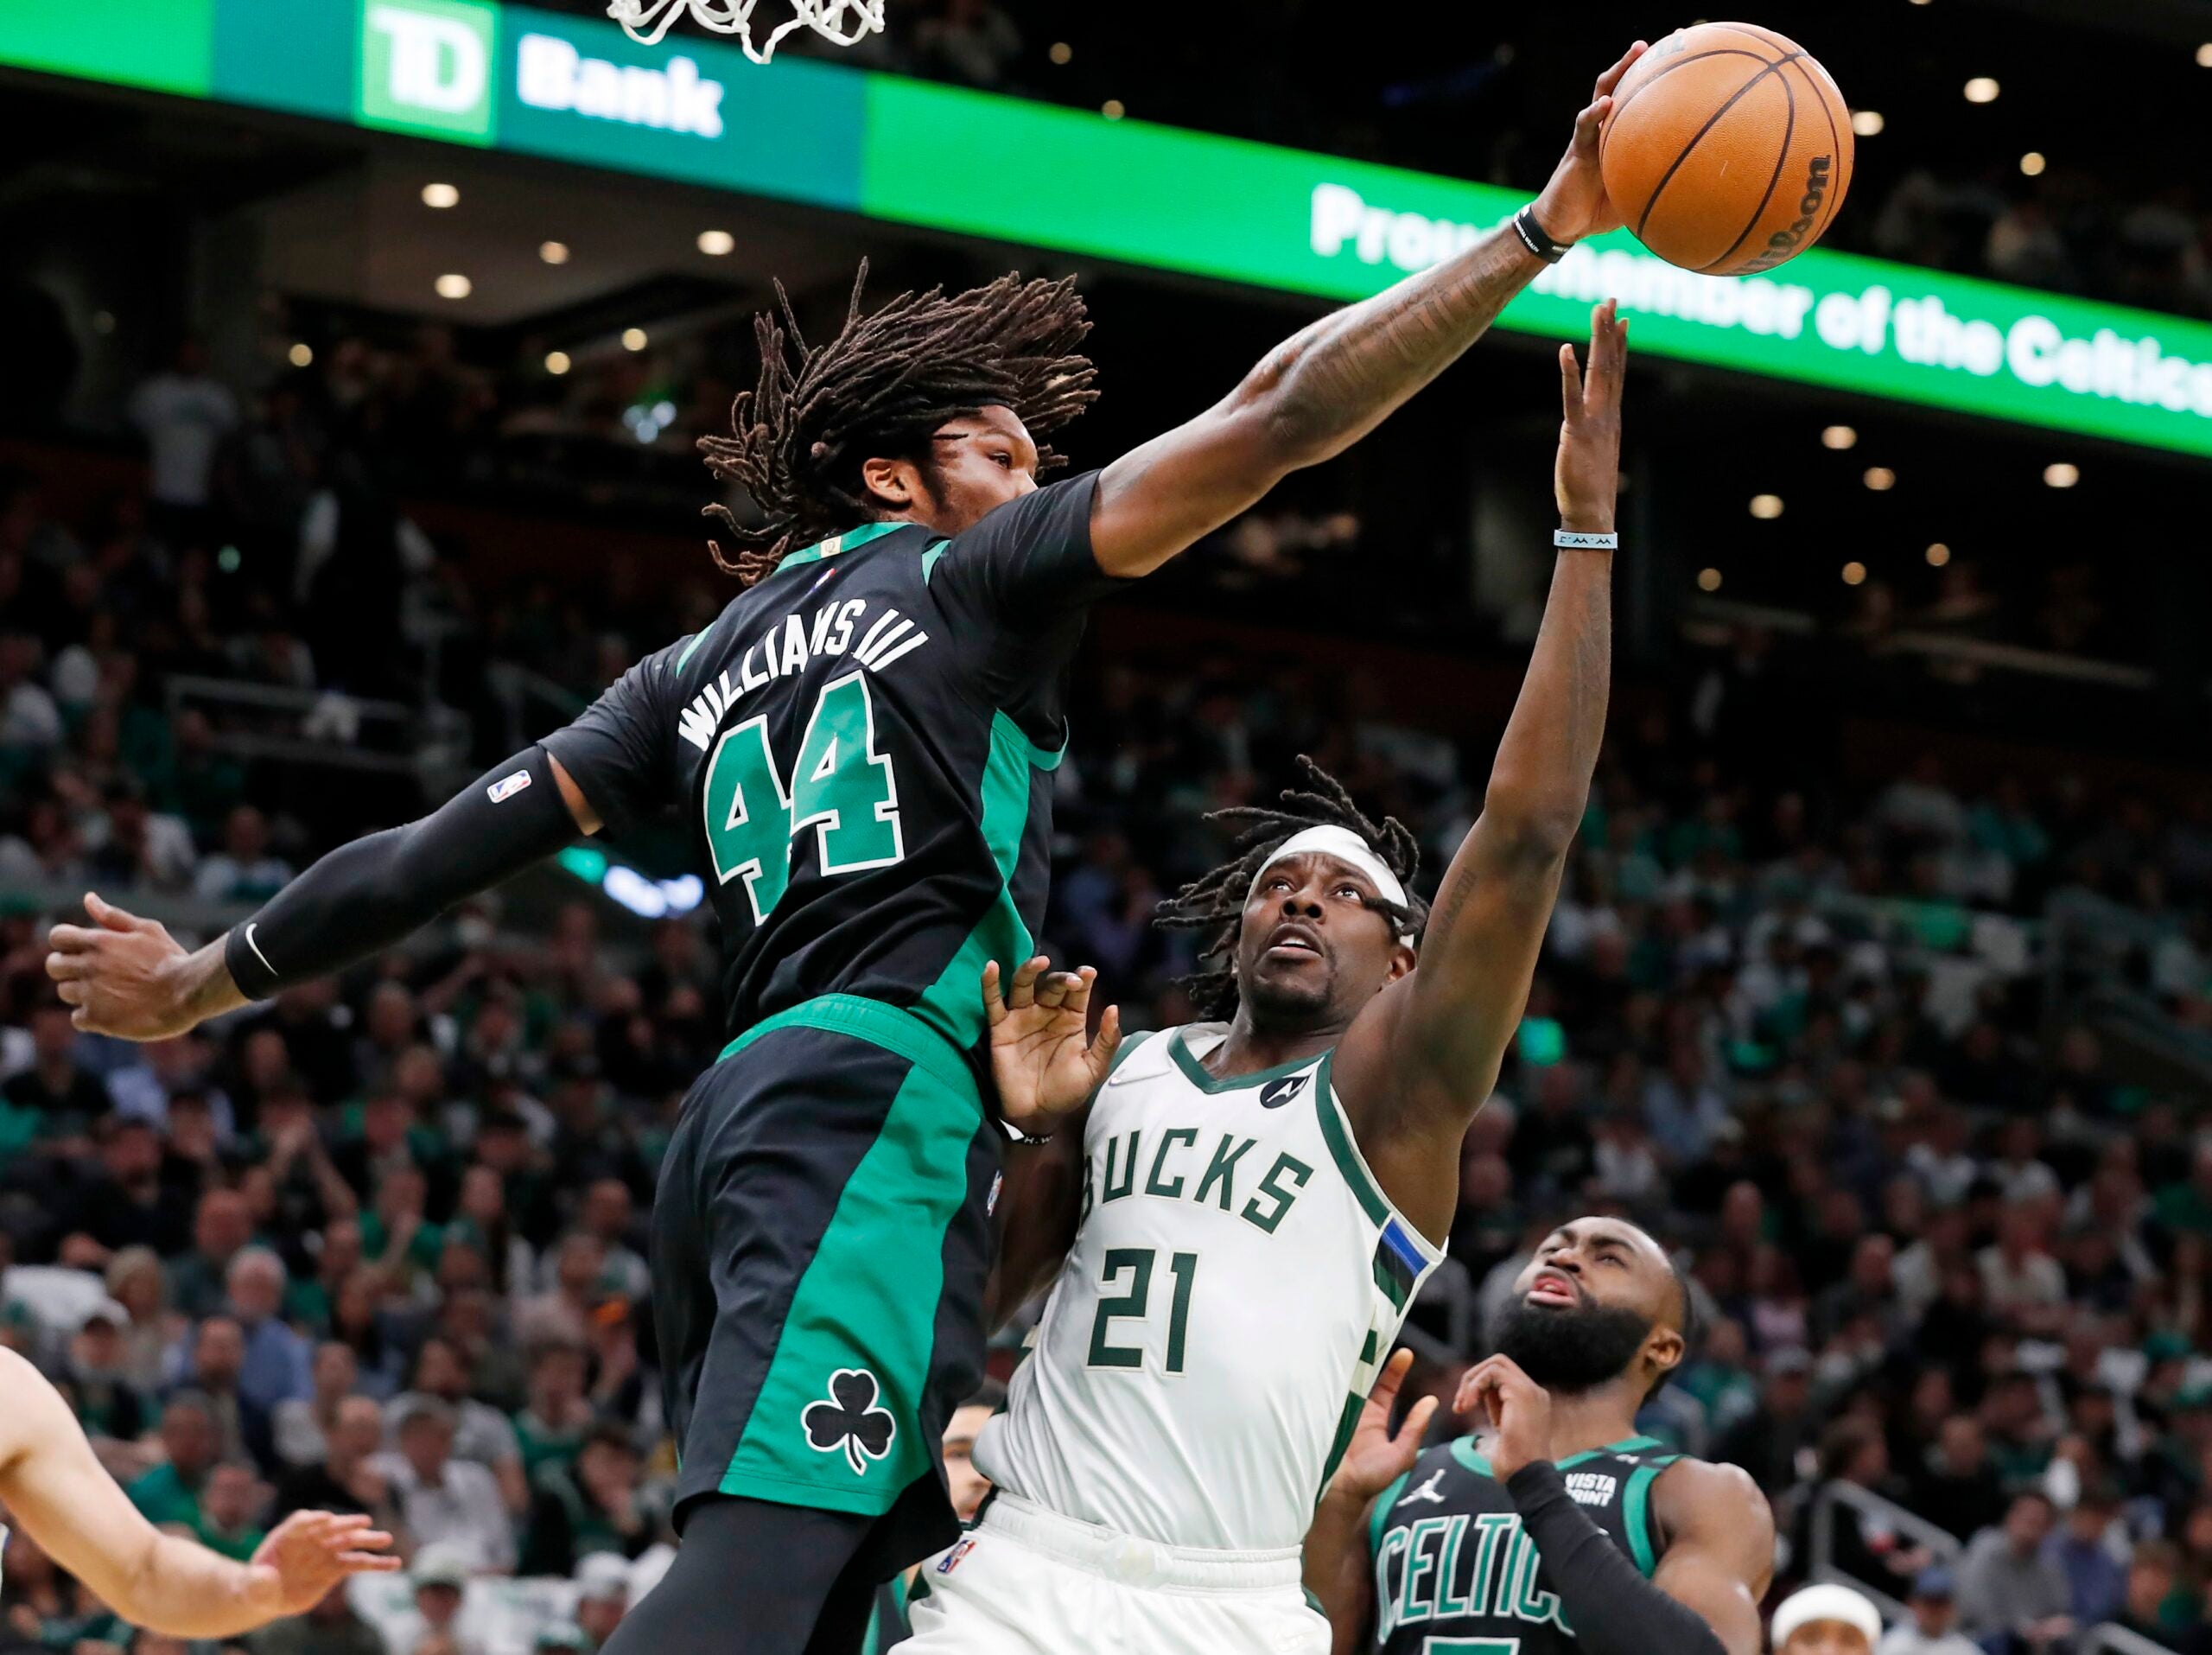 Williams has 27, Celtics make 22 3s in Game 7 rout of Bucks